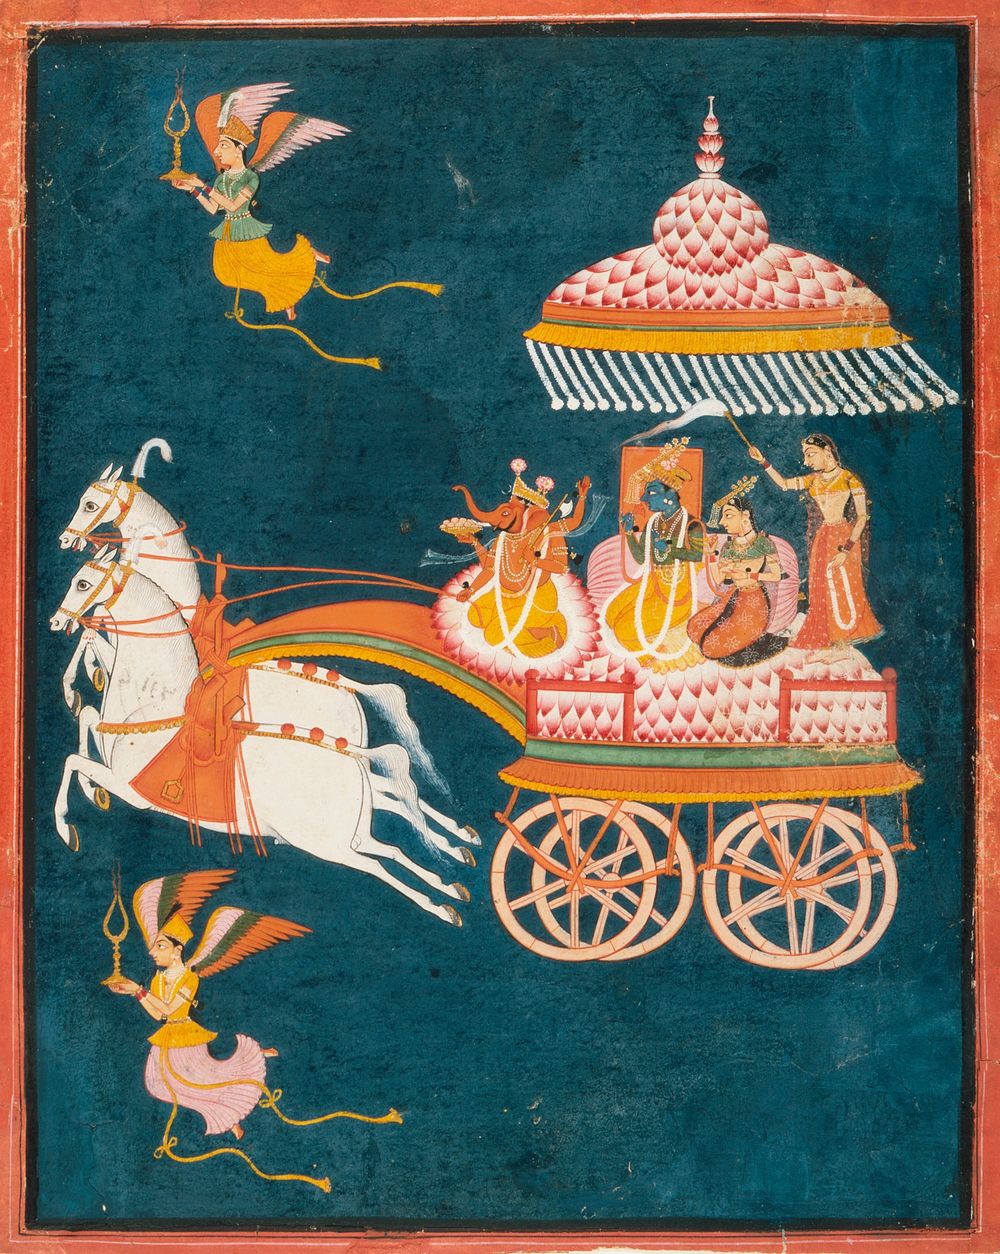 Krishna and Rukmini as Groom and Bride in a Celestial Chariot Driven by Ganesha